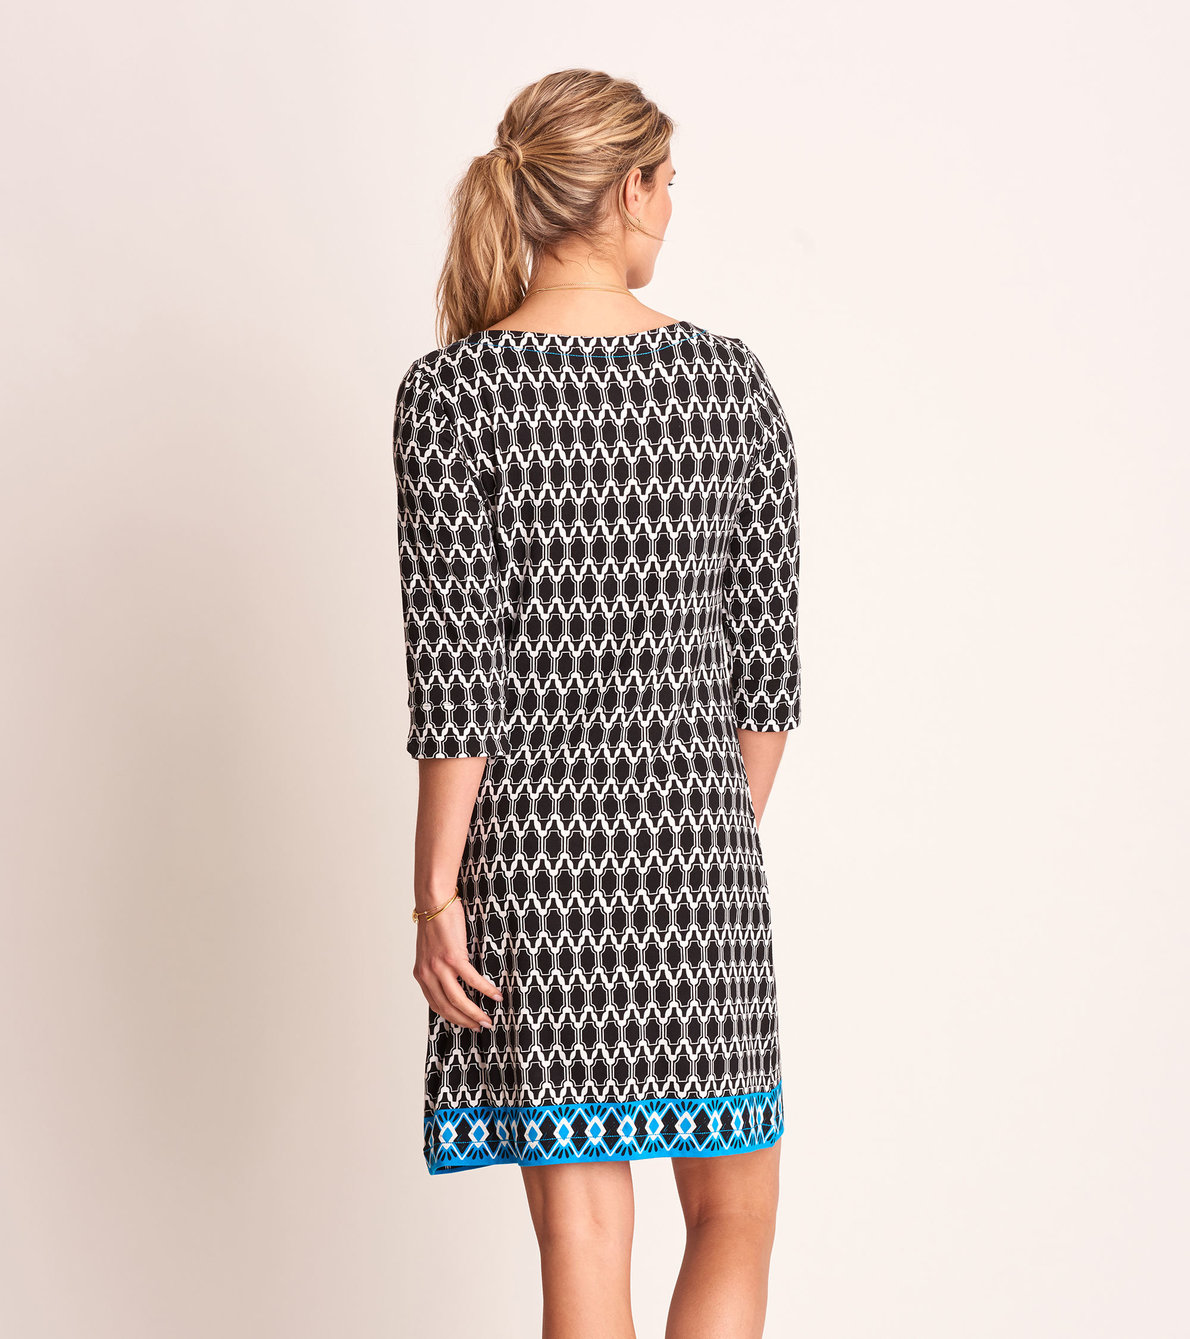 View larger image of Lucy Dress - Black Mosaic